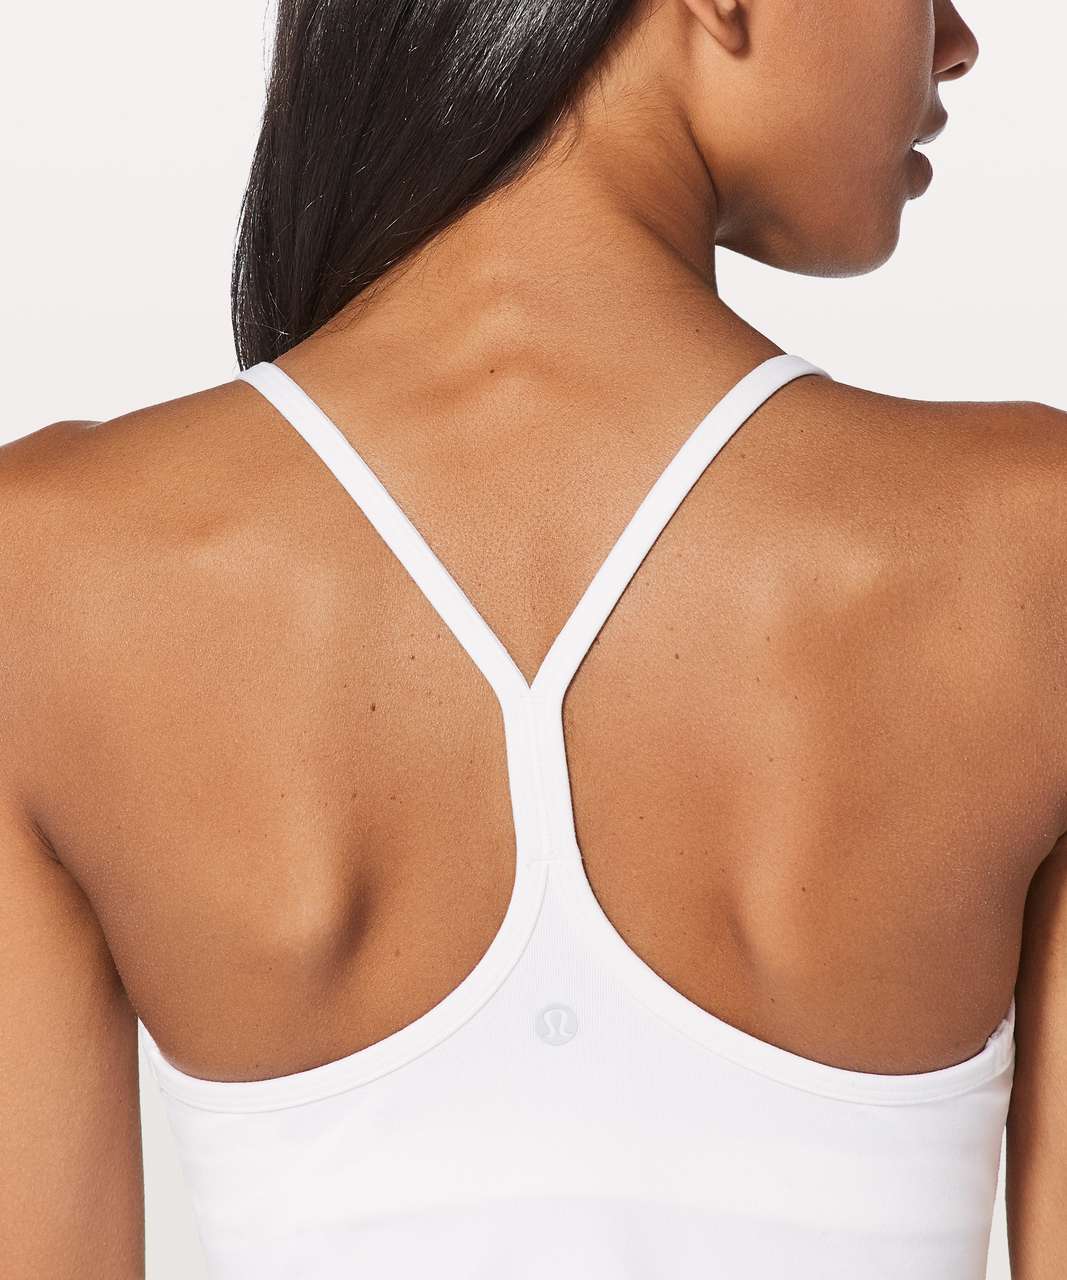 Lululemon Power Y Tank *Luon - White (First Release)